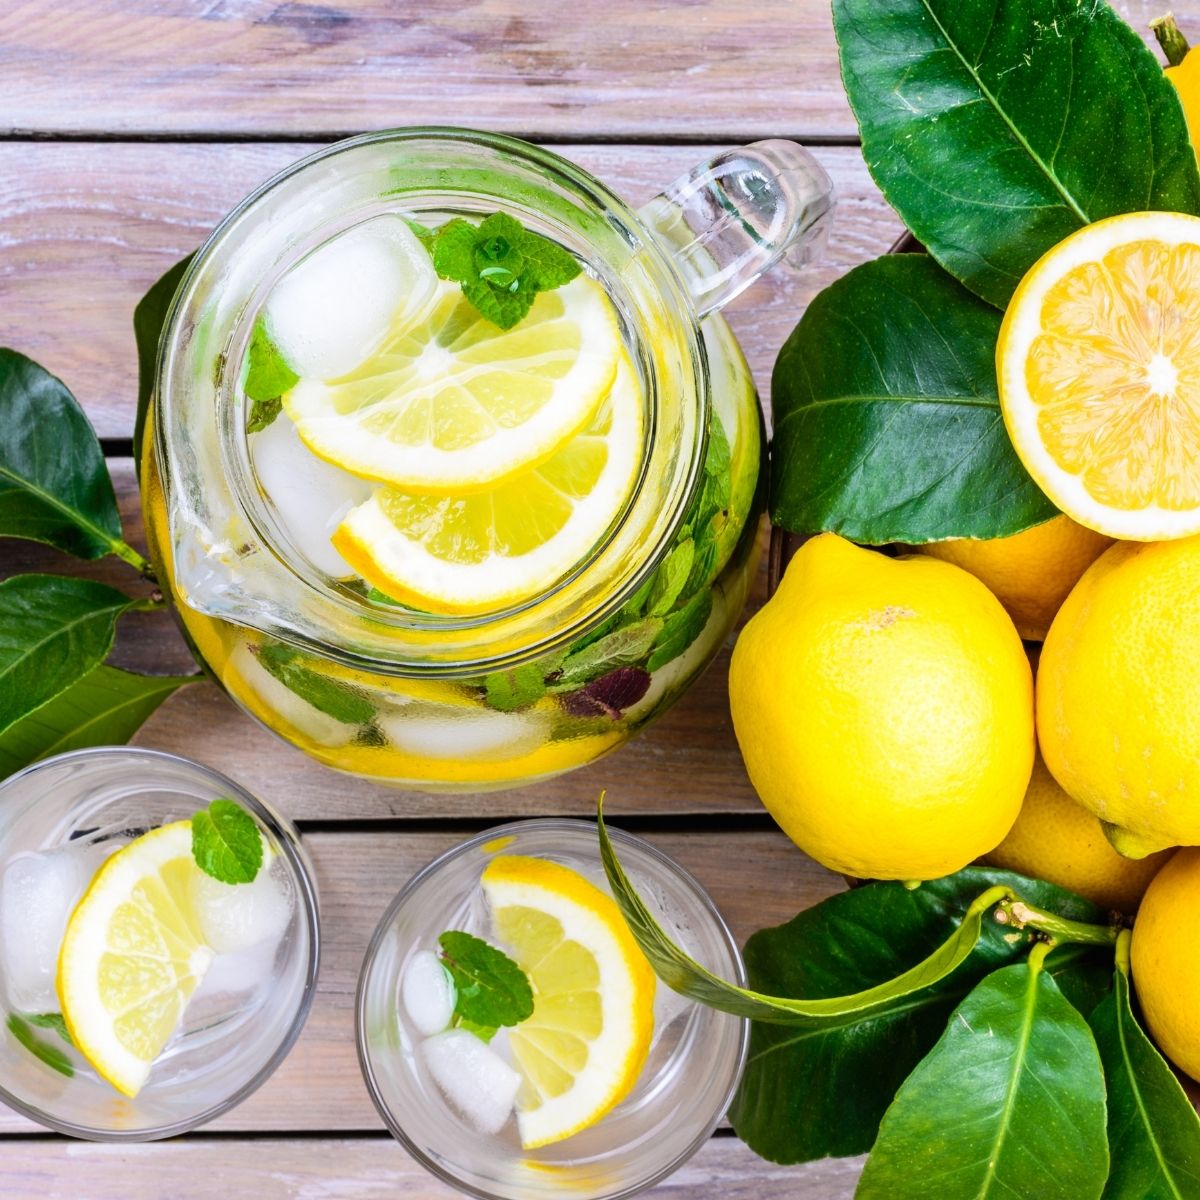 Benefits of lemon water when enjoyed daily like this fresh pitcher with lemons and greens.